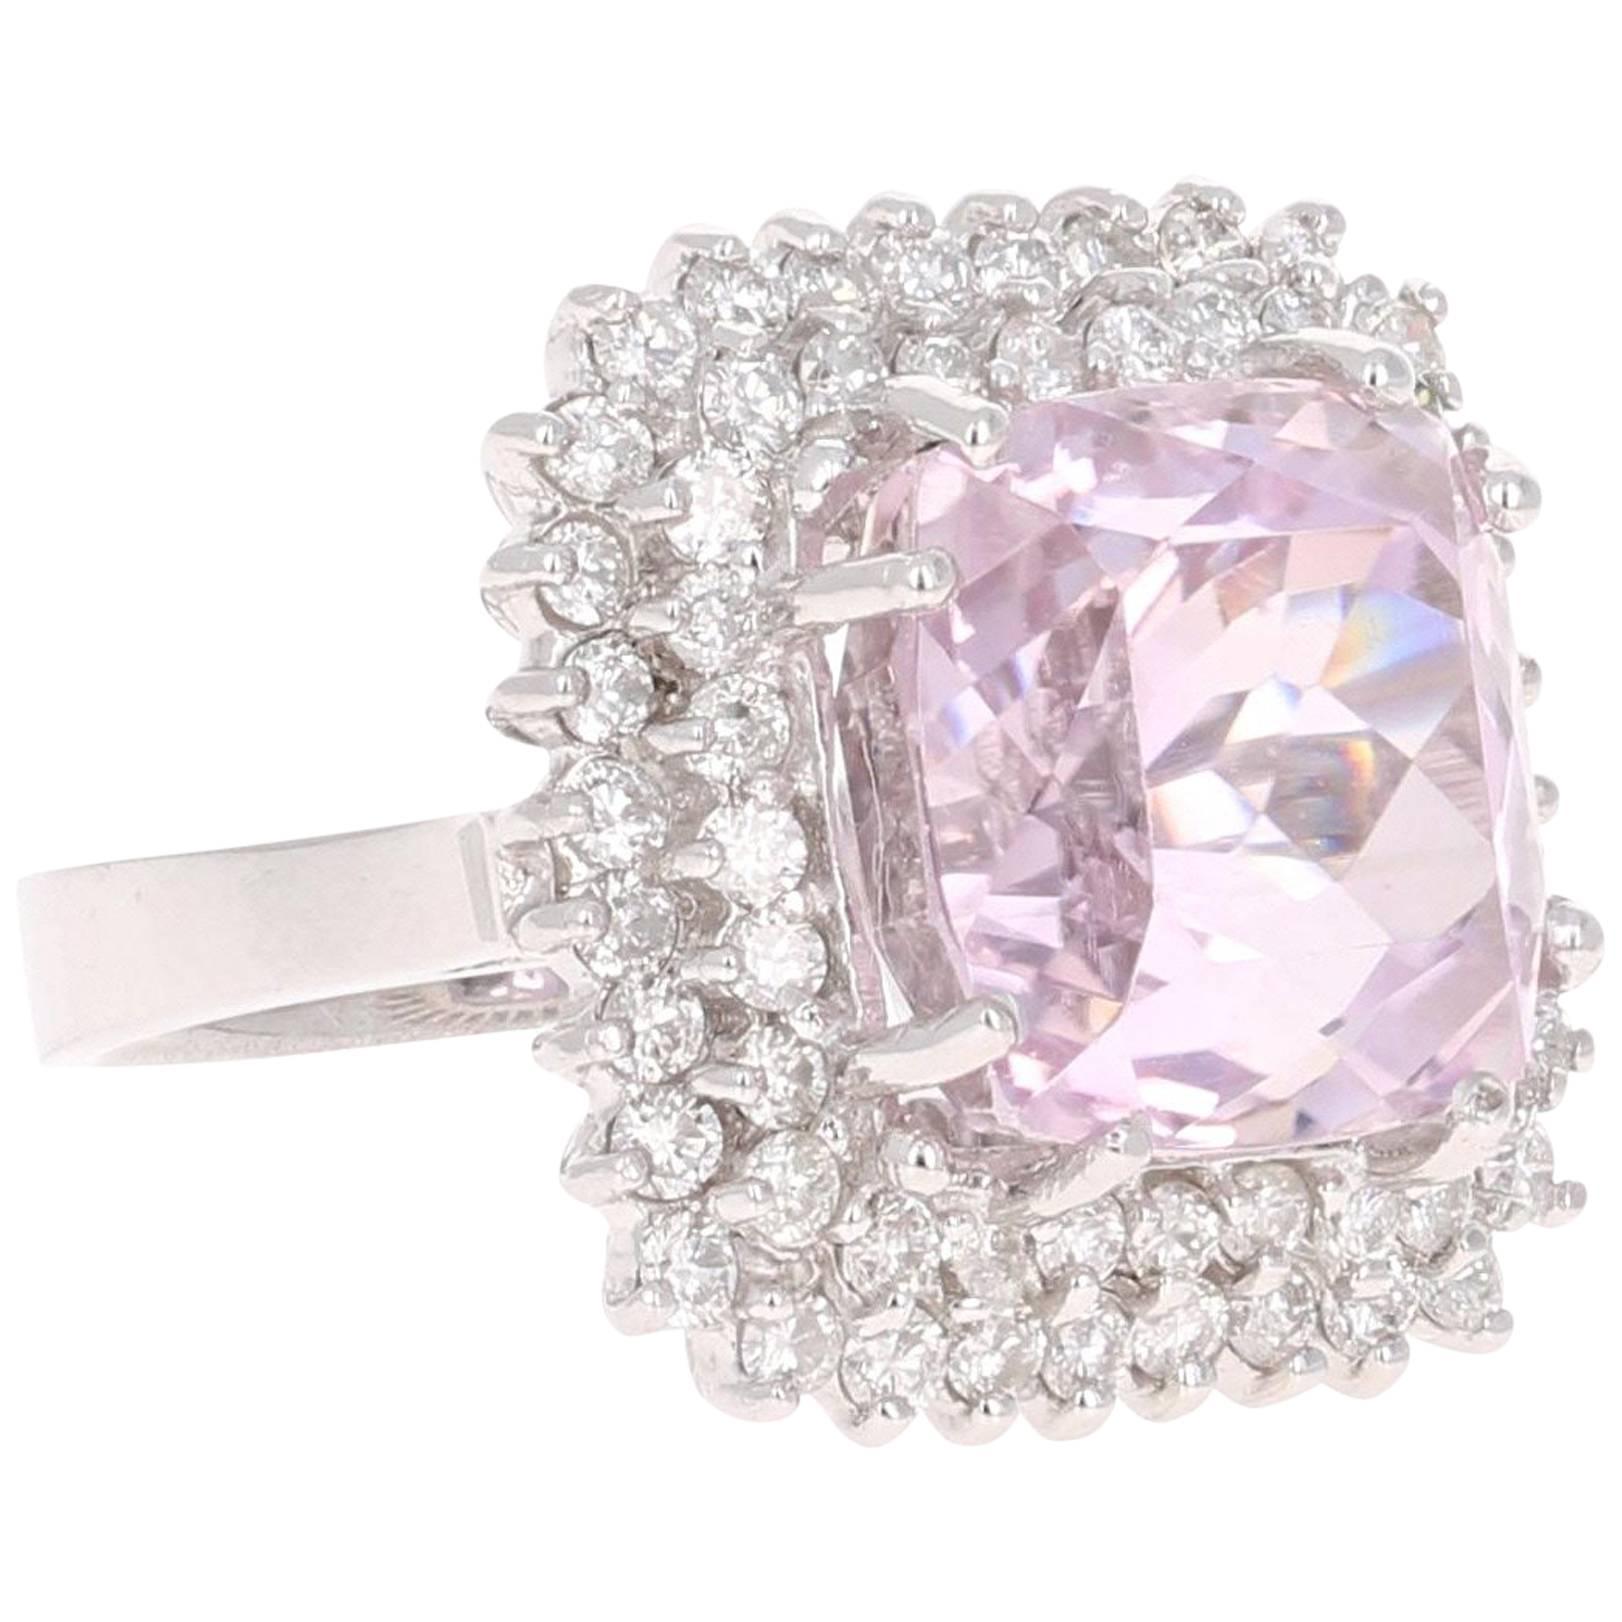 This stunning show stopper has a huge 14.17 carat Kunzite that is set in the center of the ring, it is surrounded by 2 rows of 60 Round Cut Diamonds that weigh 1.45 carats (Clarity: SI2, Color: F). The total carat weight of the ring is 15.62 carats.